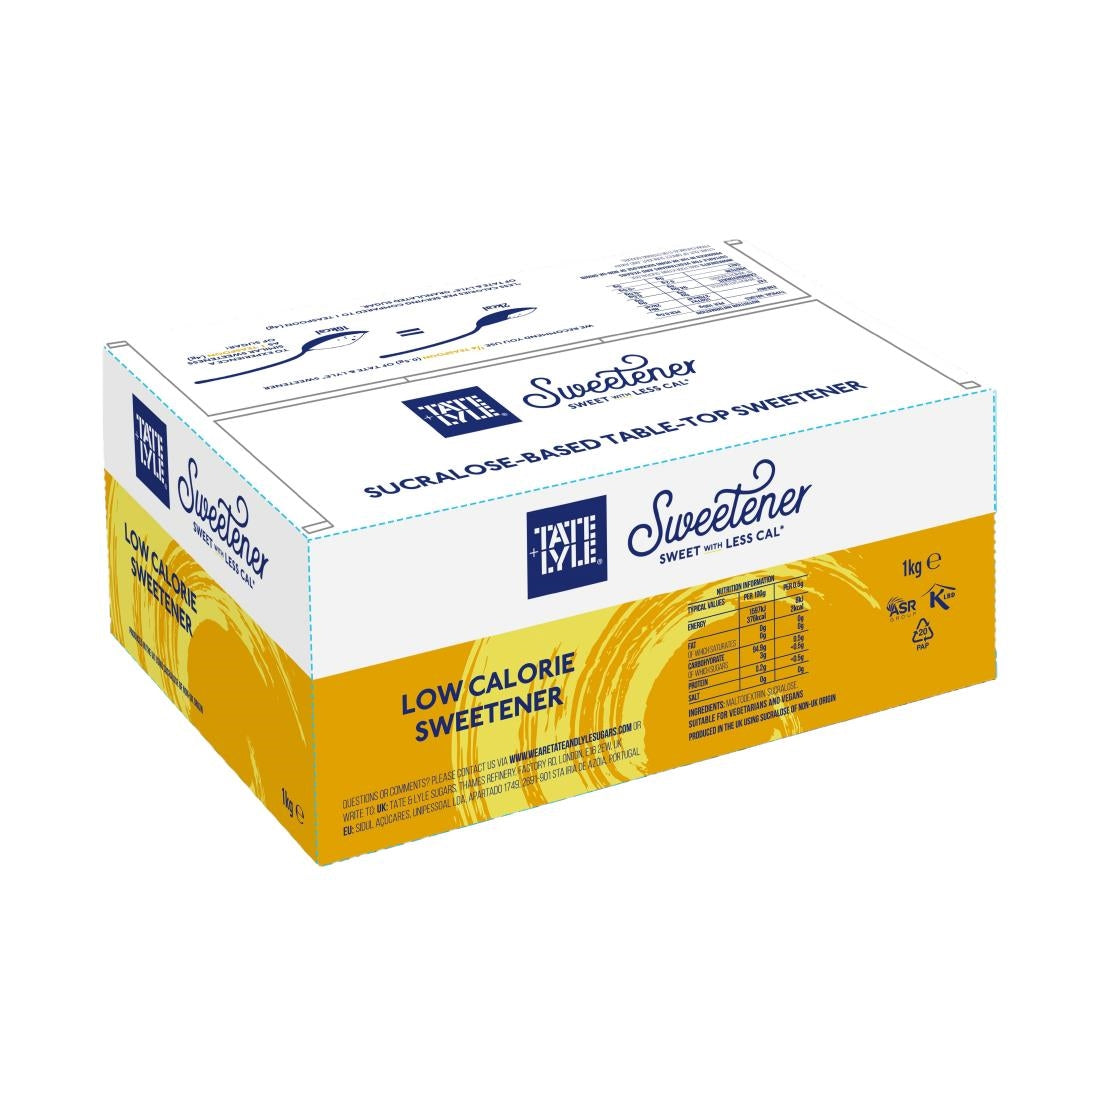 HP983 Tate & Lyle Sucralose Sweetener Sachets (Pack of 1000)